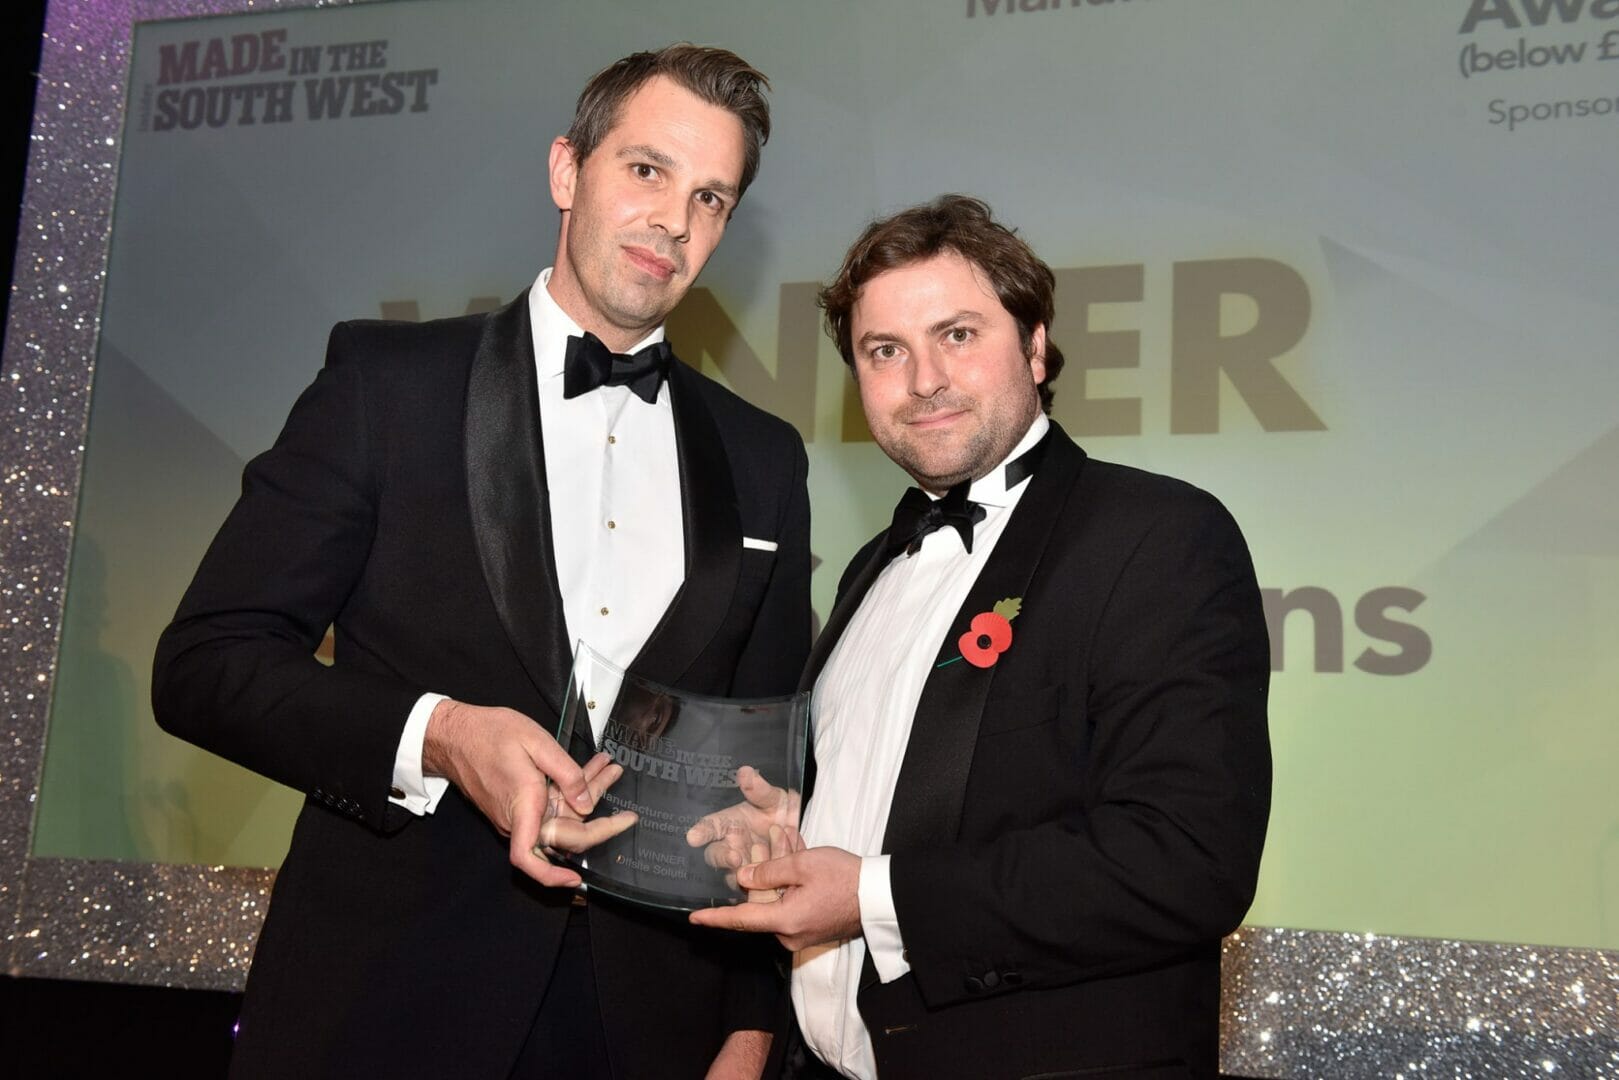 OFFSITE SOLUTIONS WINS MANUFACTURER OF THE YEAR AWARD @bathroompod